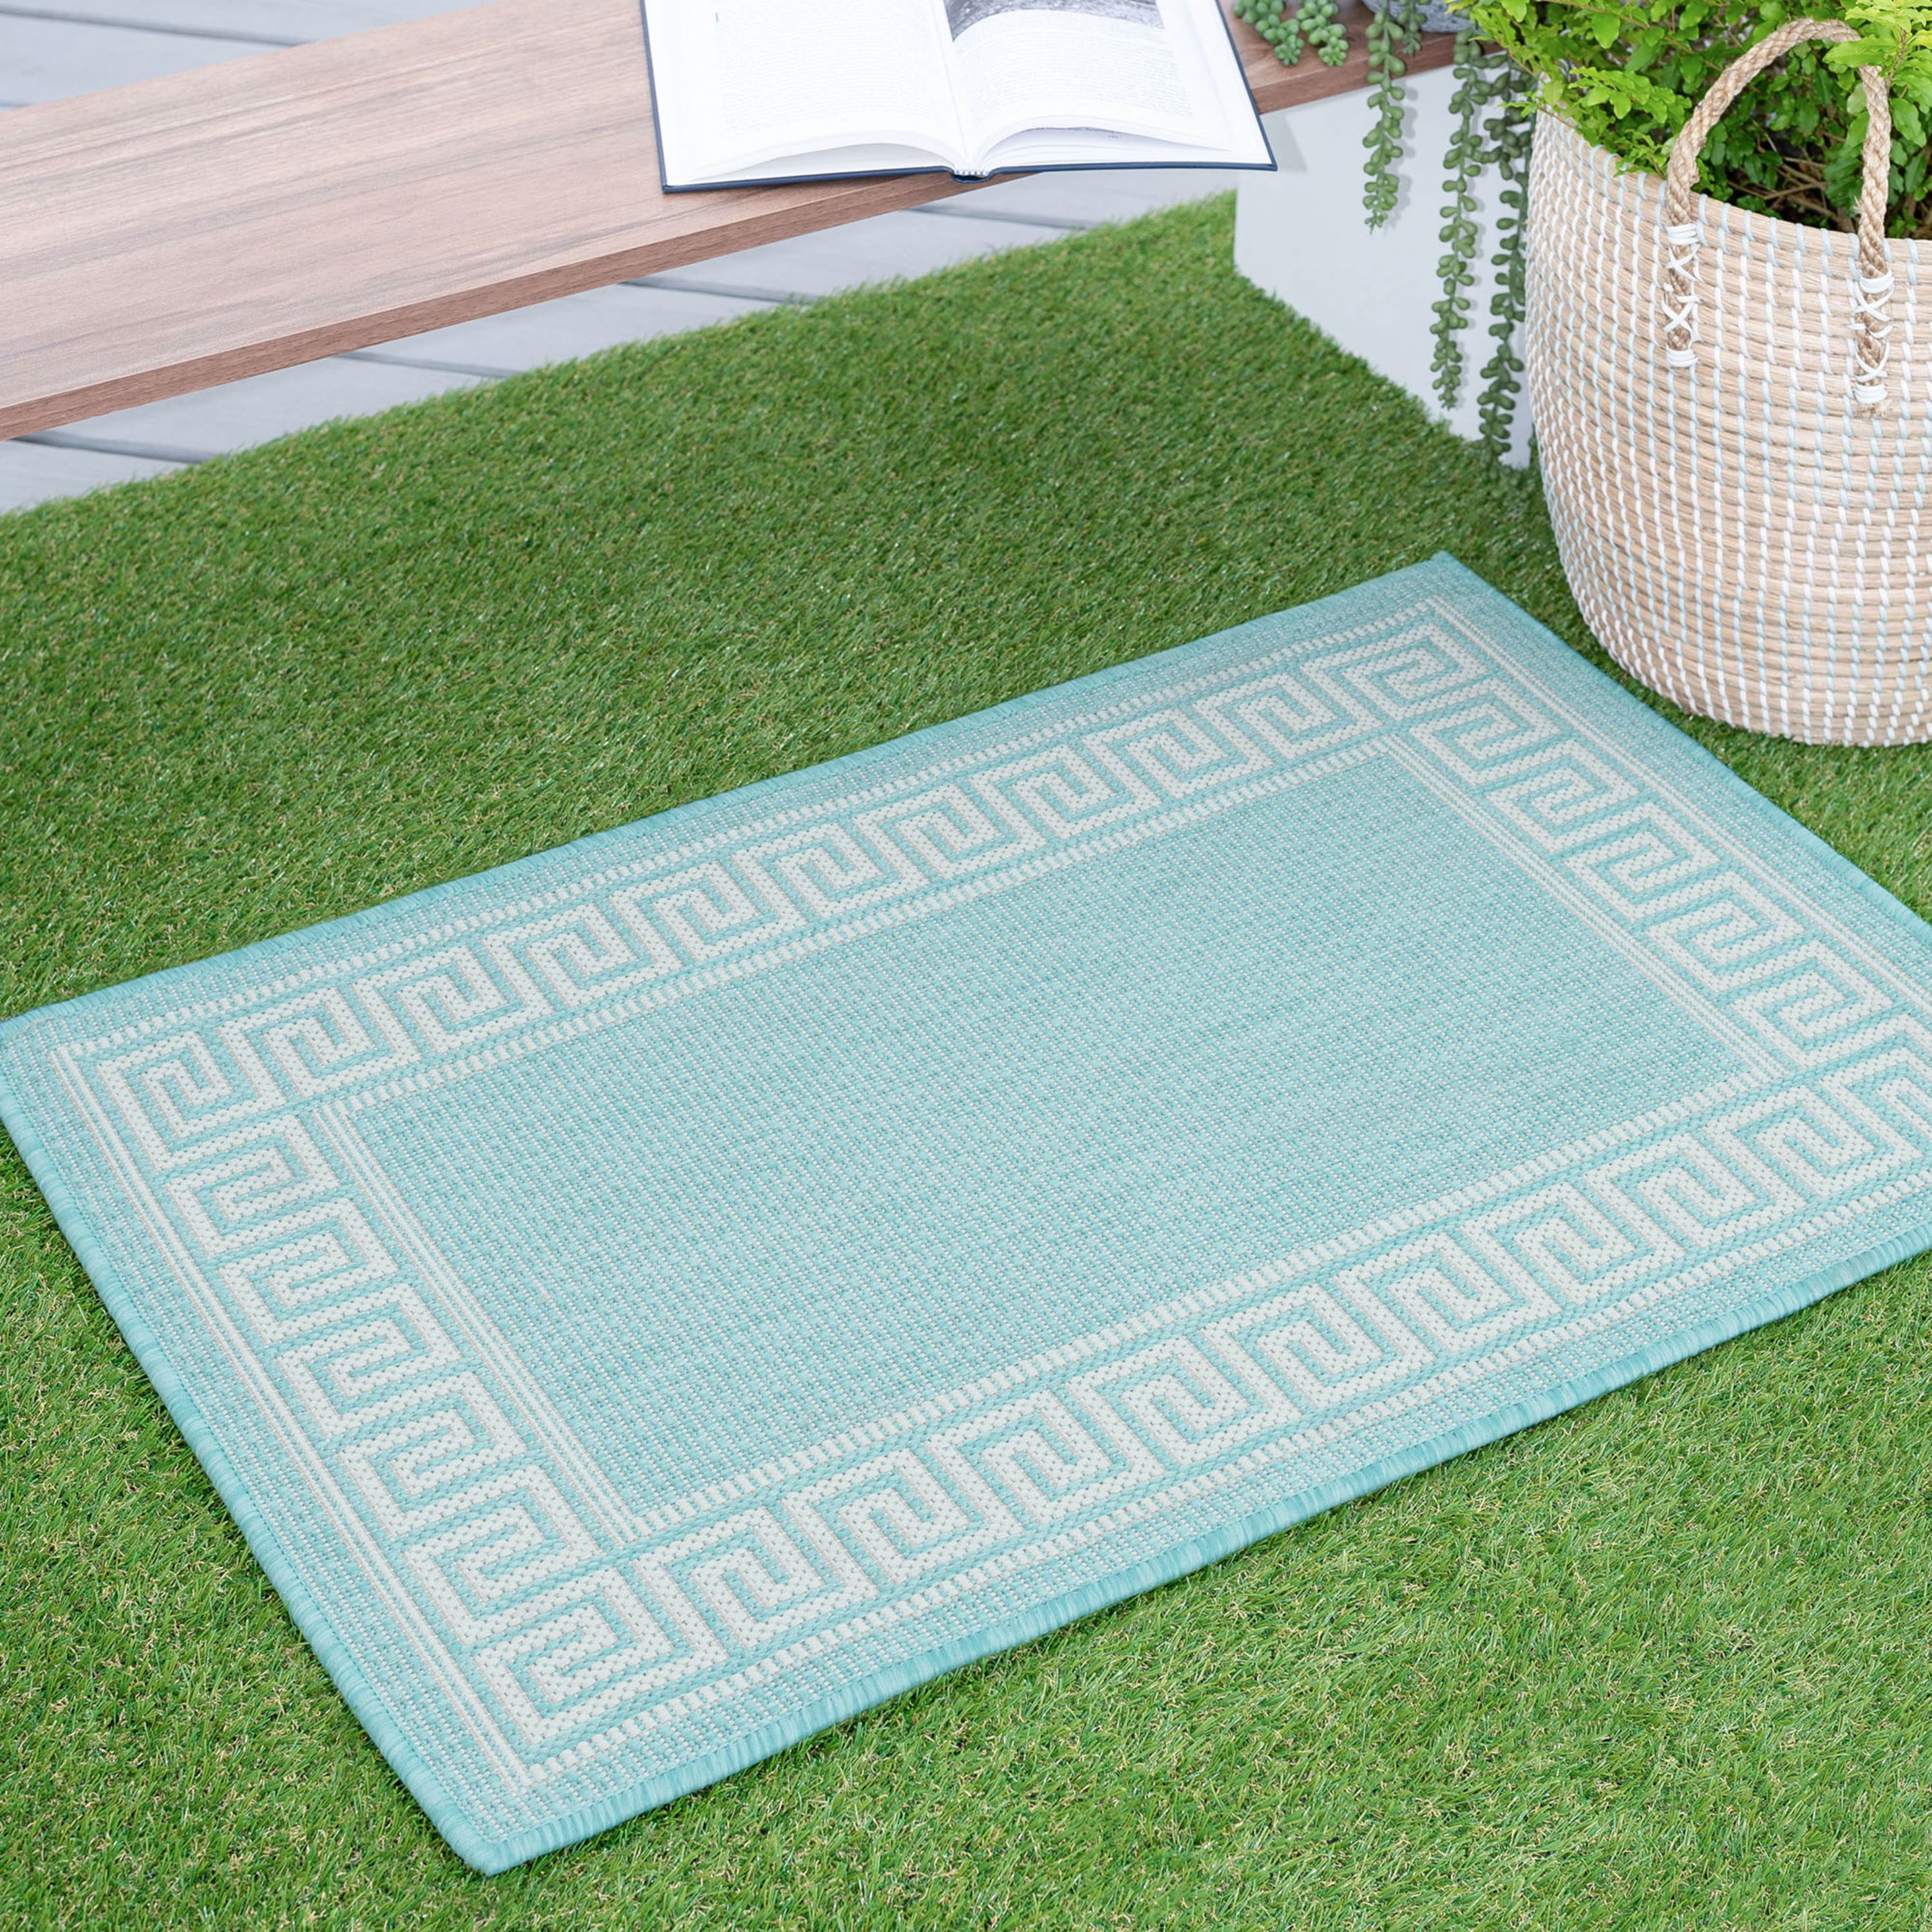 Duck Egg Blue Outdoor Rug Plastic Washable Rug Water Resistant